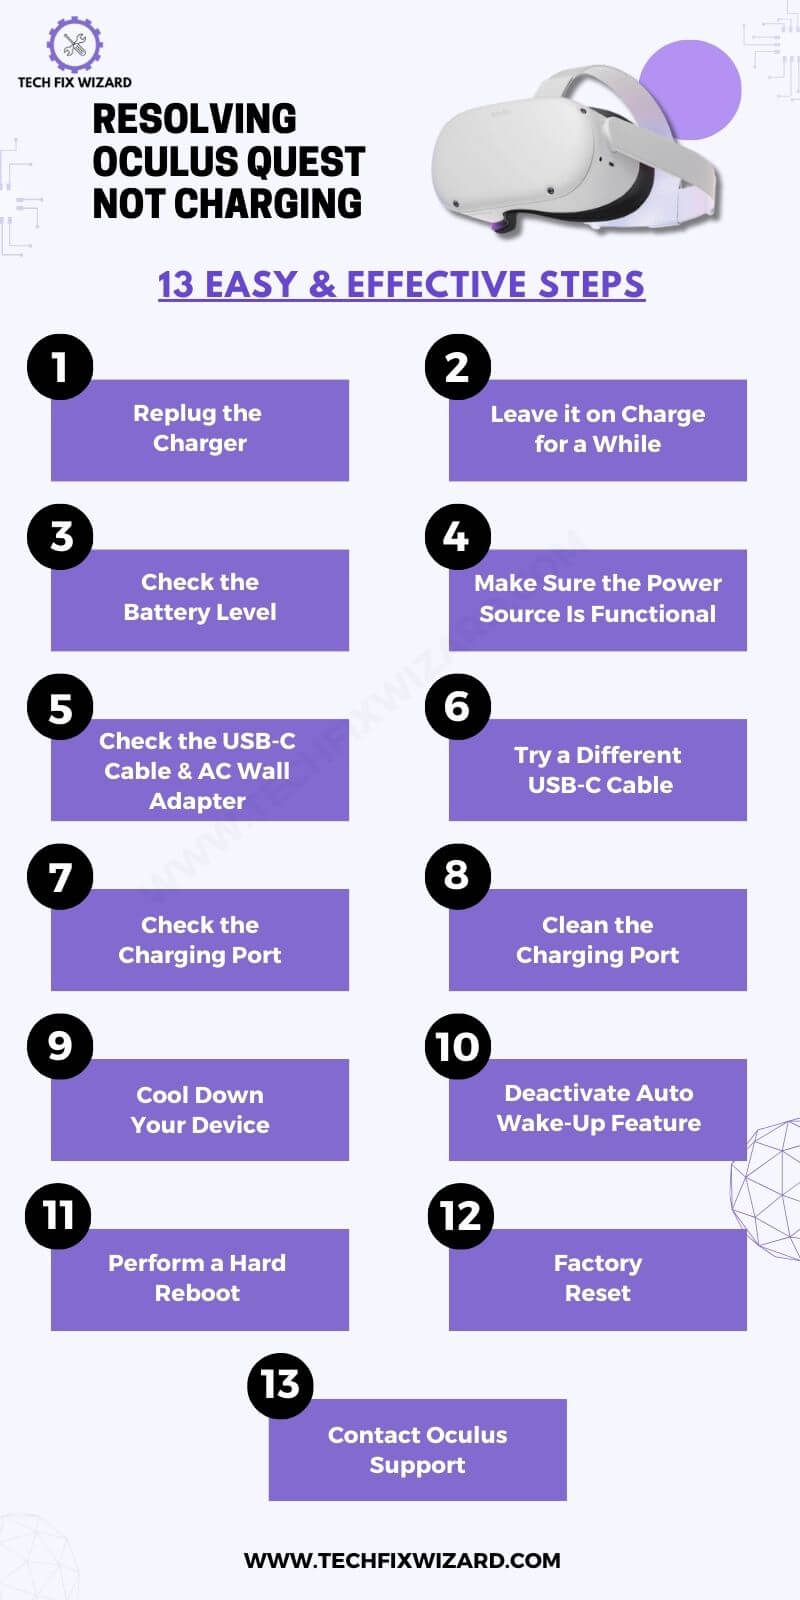 13 Ways to Fix Oculus Quest Not Charging Infographic